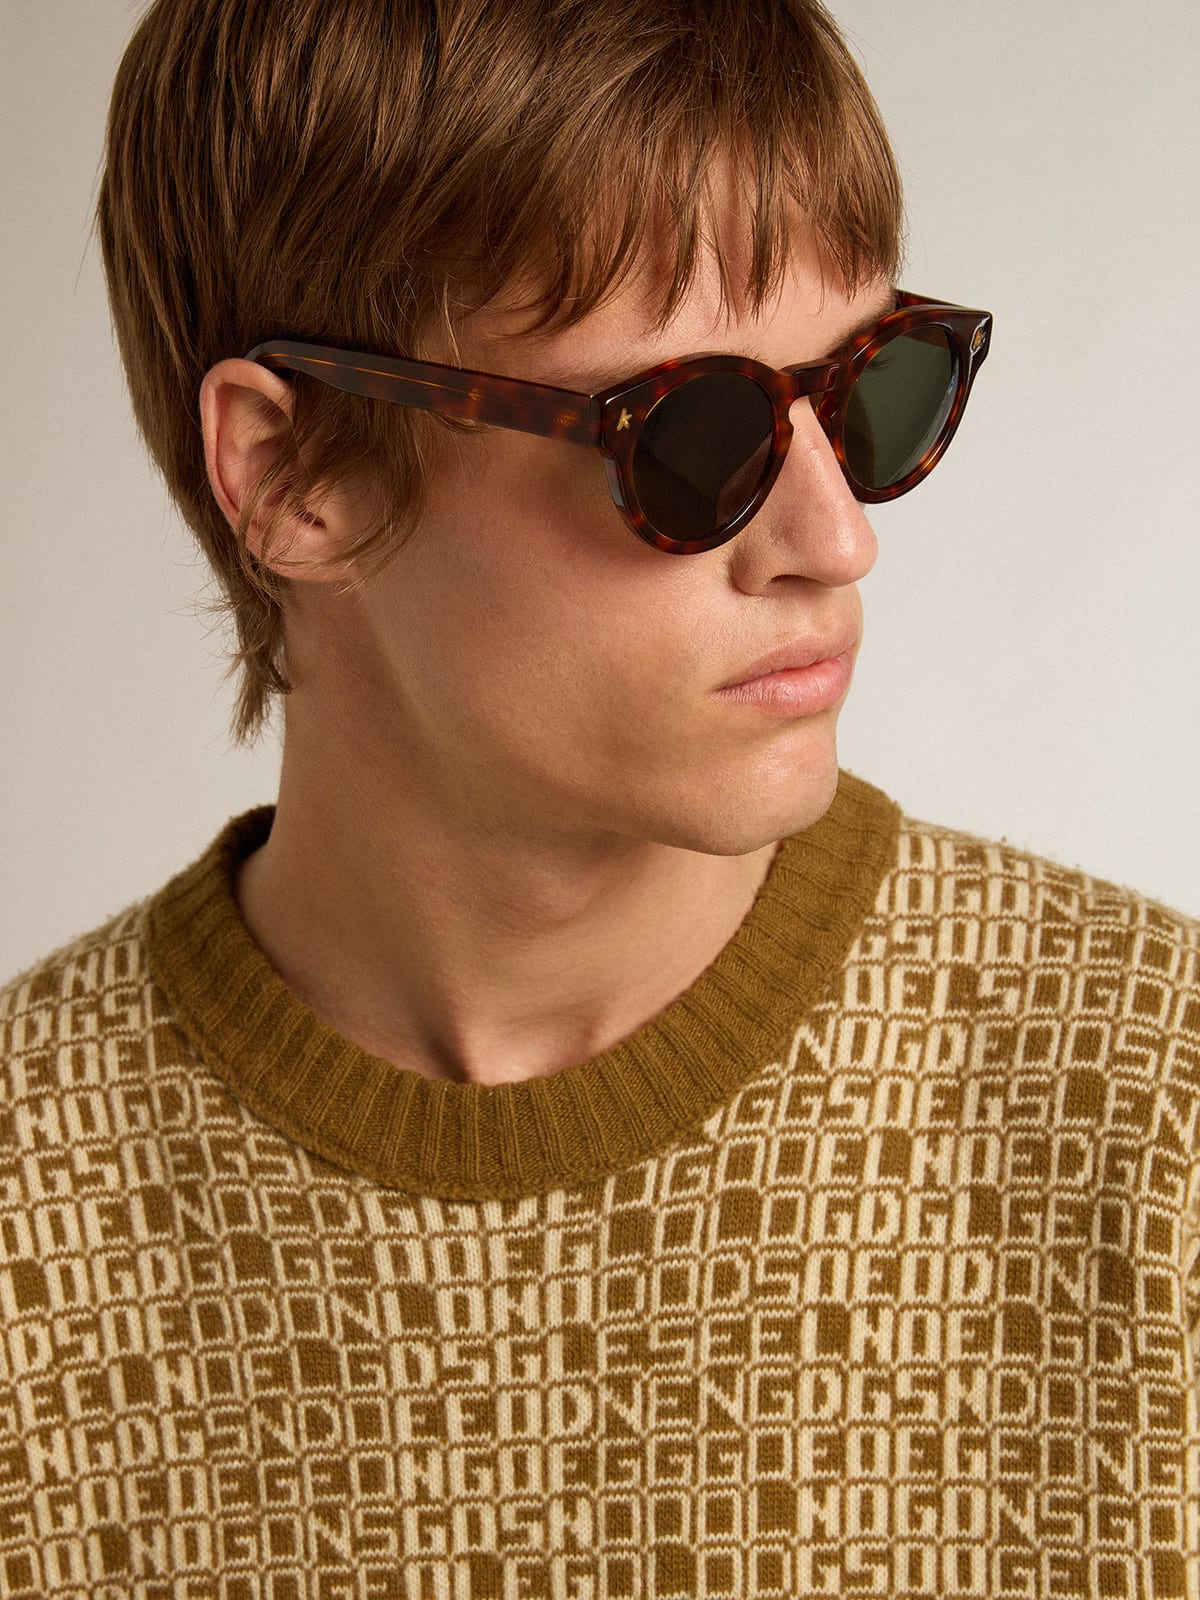 Golden Goose - Round-neck sweater with olive-green jacquard lettering motif in 